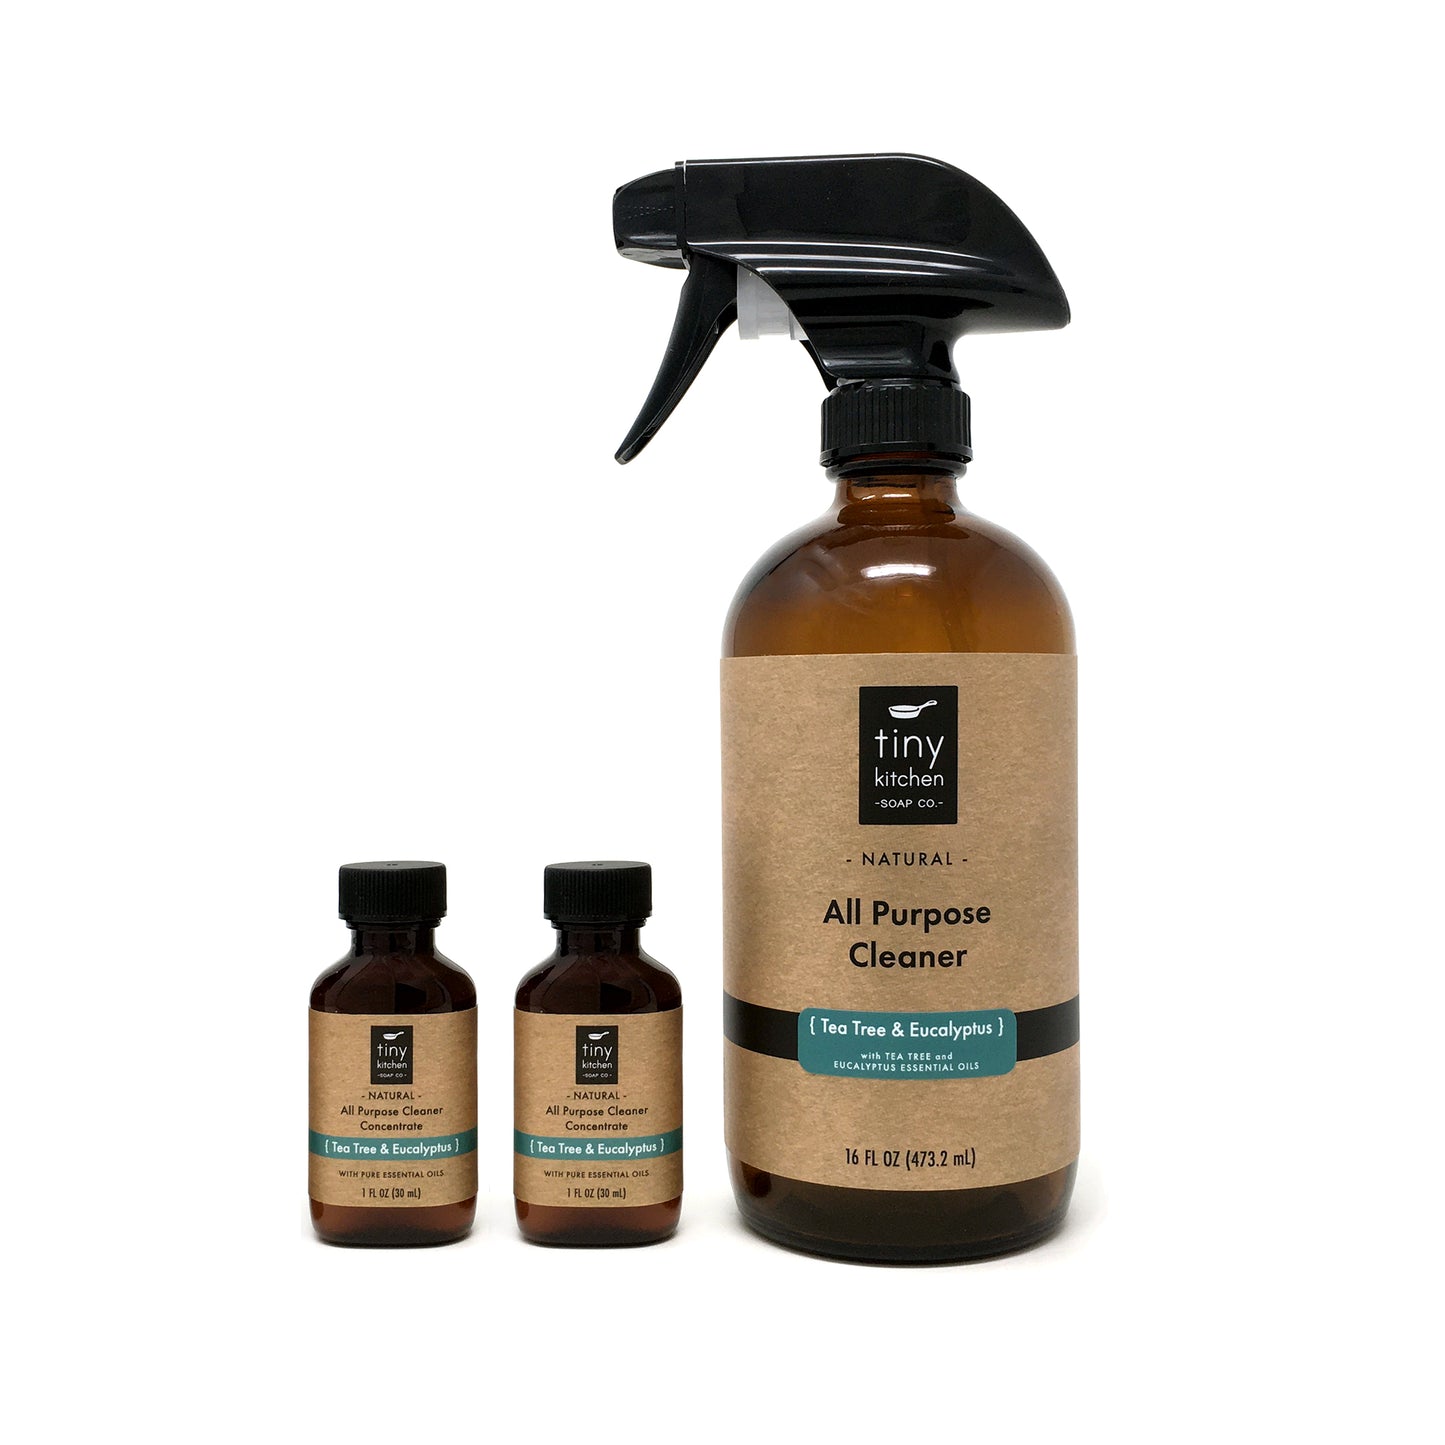 Natural All Purpose Cleaner Starter Kit - Tea Tree & Eucalyptus (Glass Spray Bottle and Two Concentrated Refills)